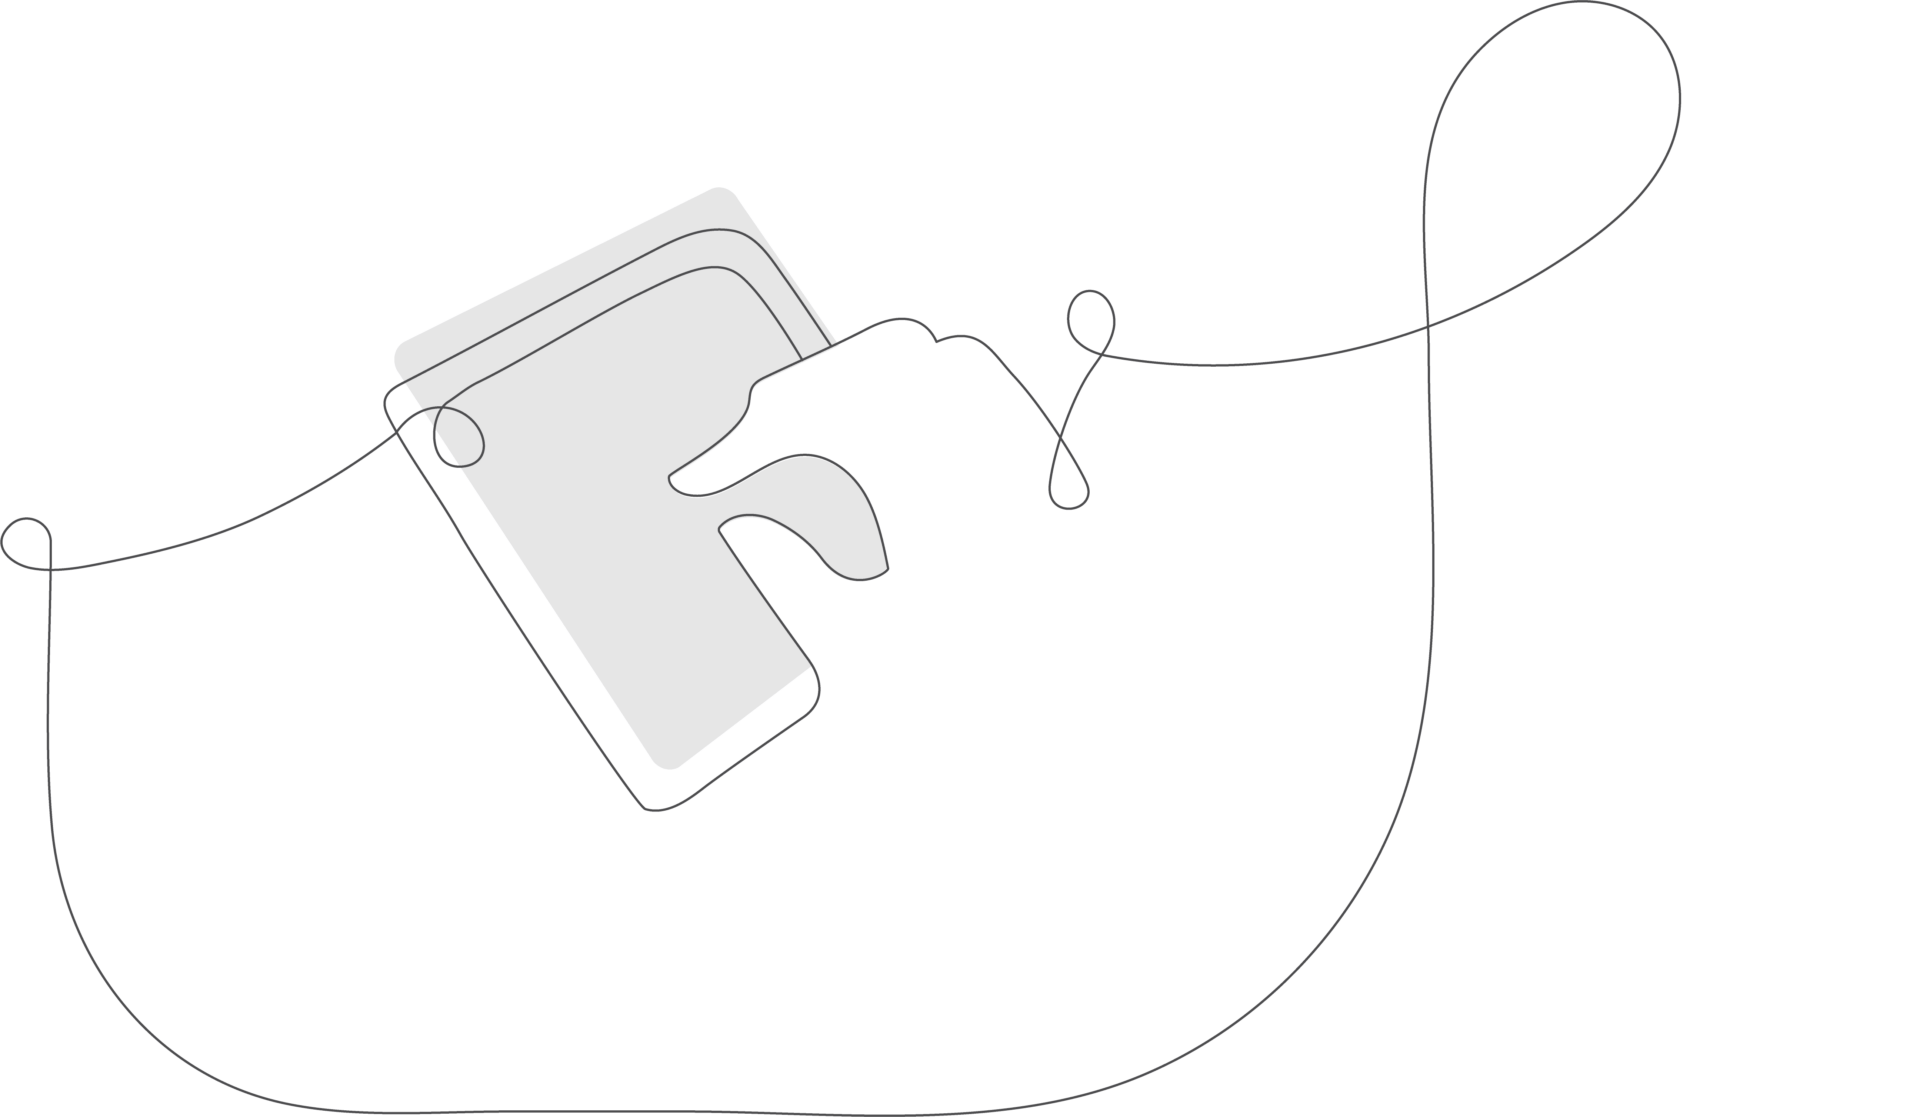 Line drawing of a hand holding a smartphone with a continuous line art style, designed to amplify CKLA literacy research.